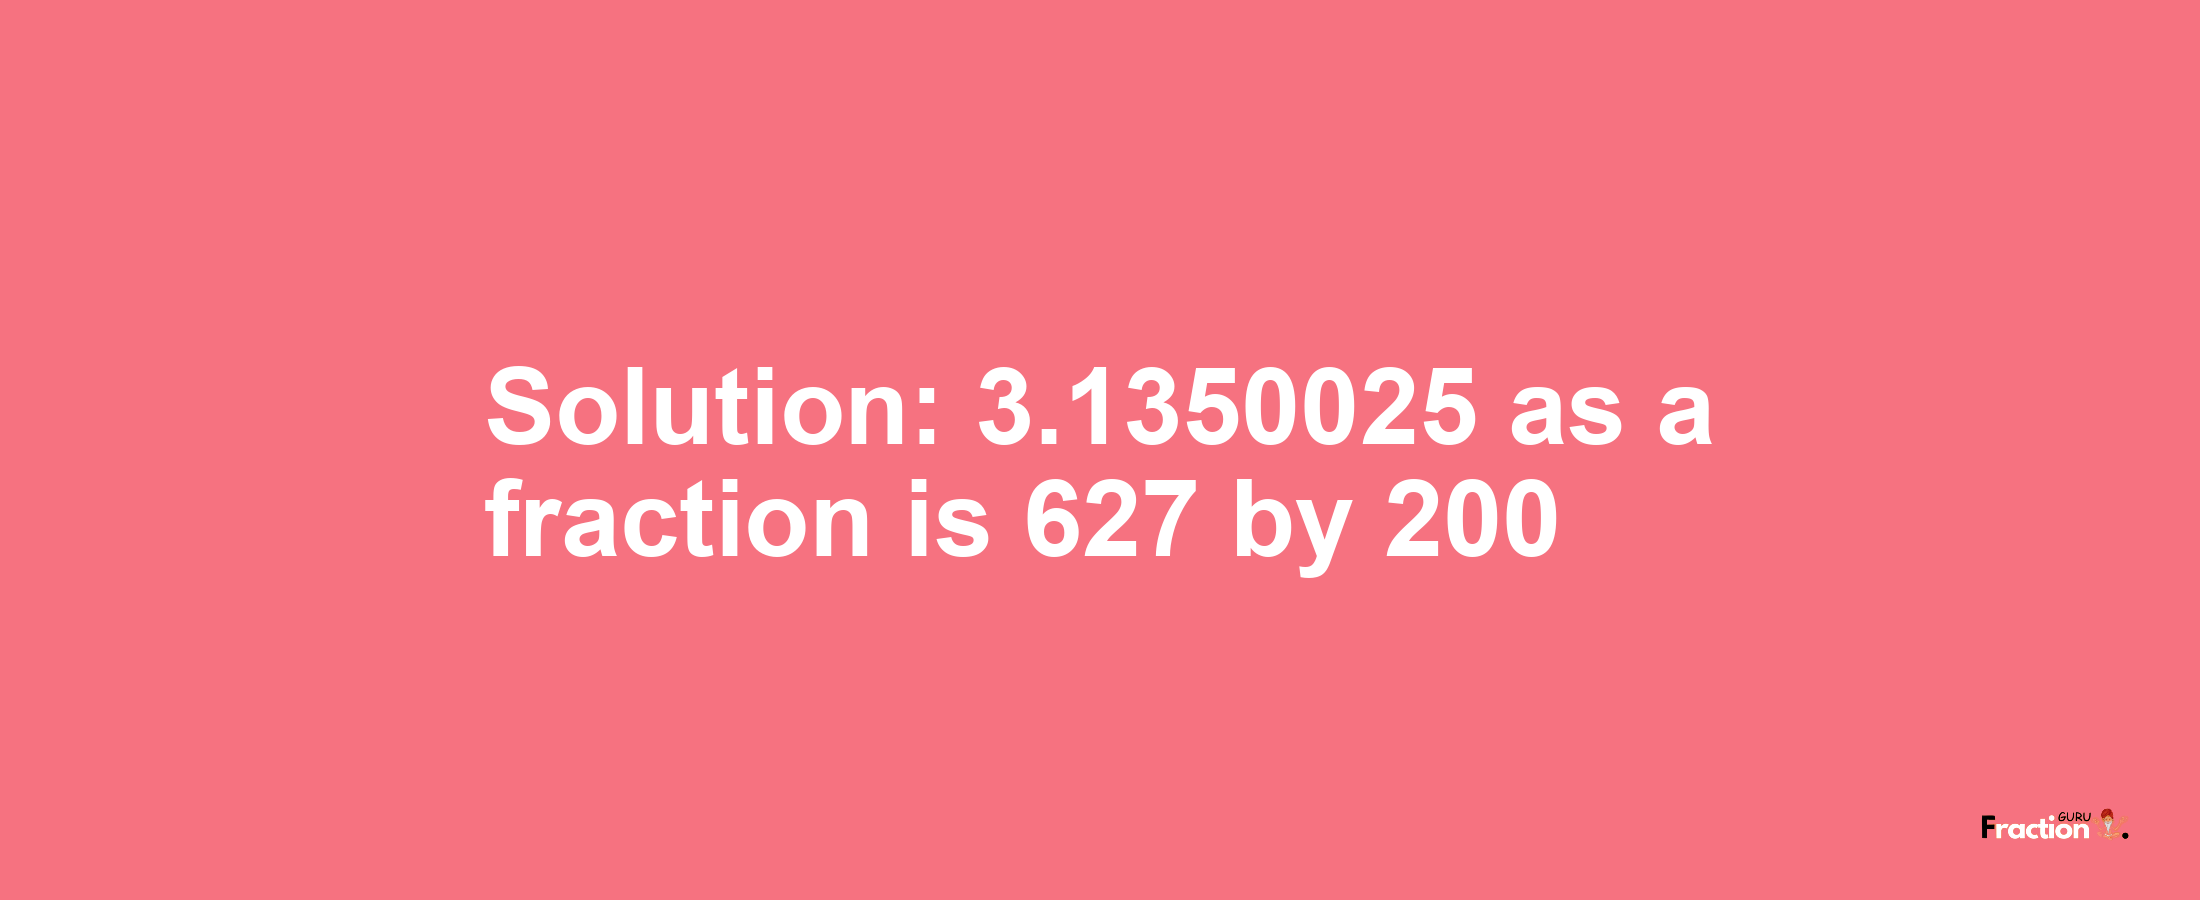 Solution:3.1350025 as a fraction is 627/200